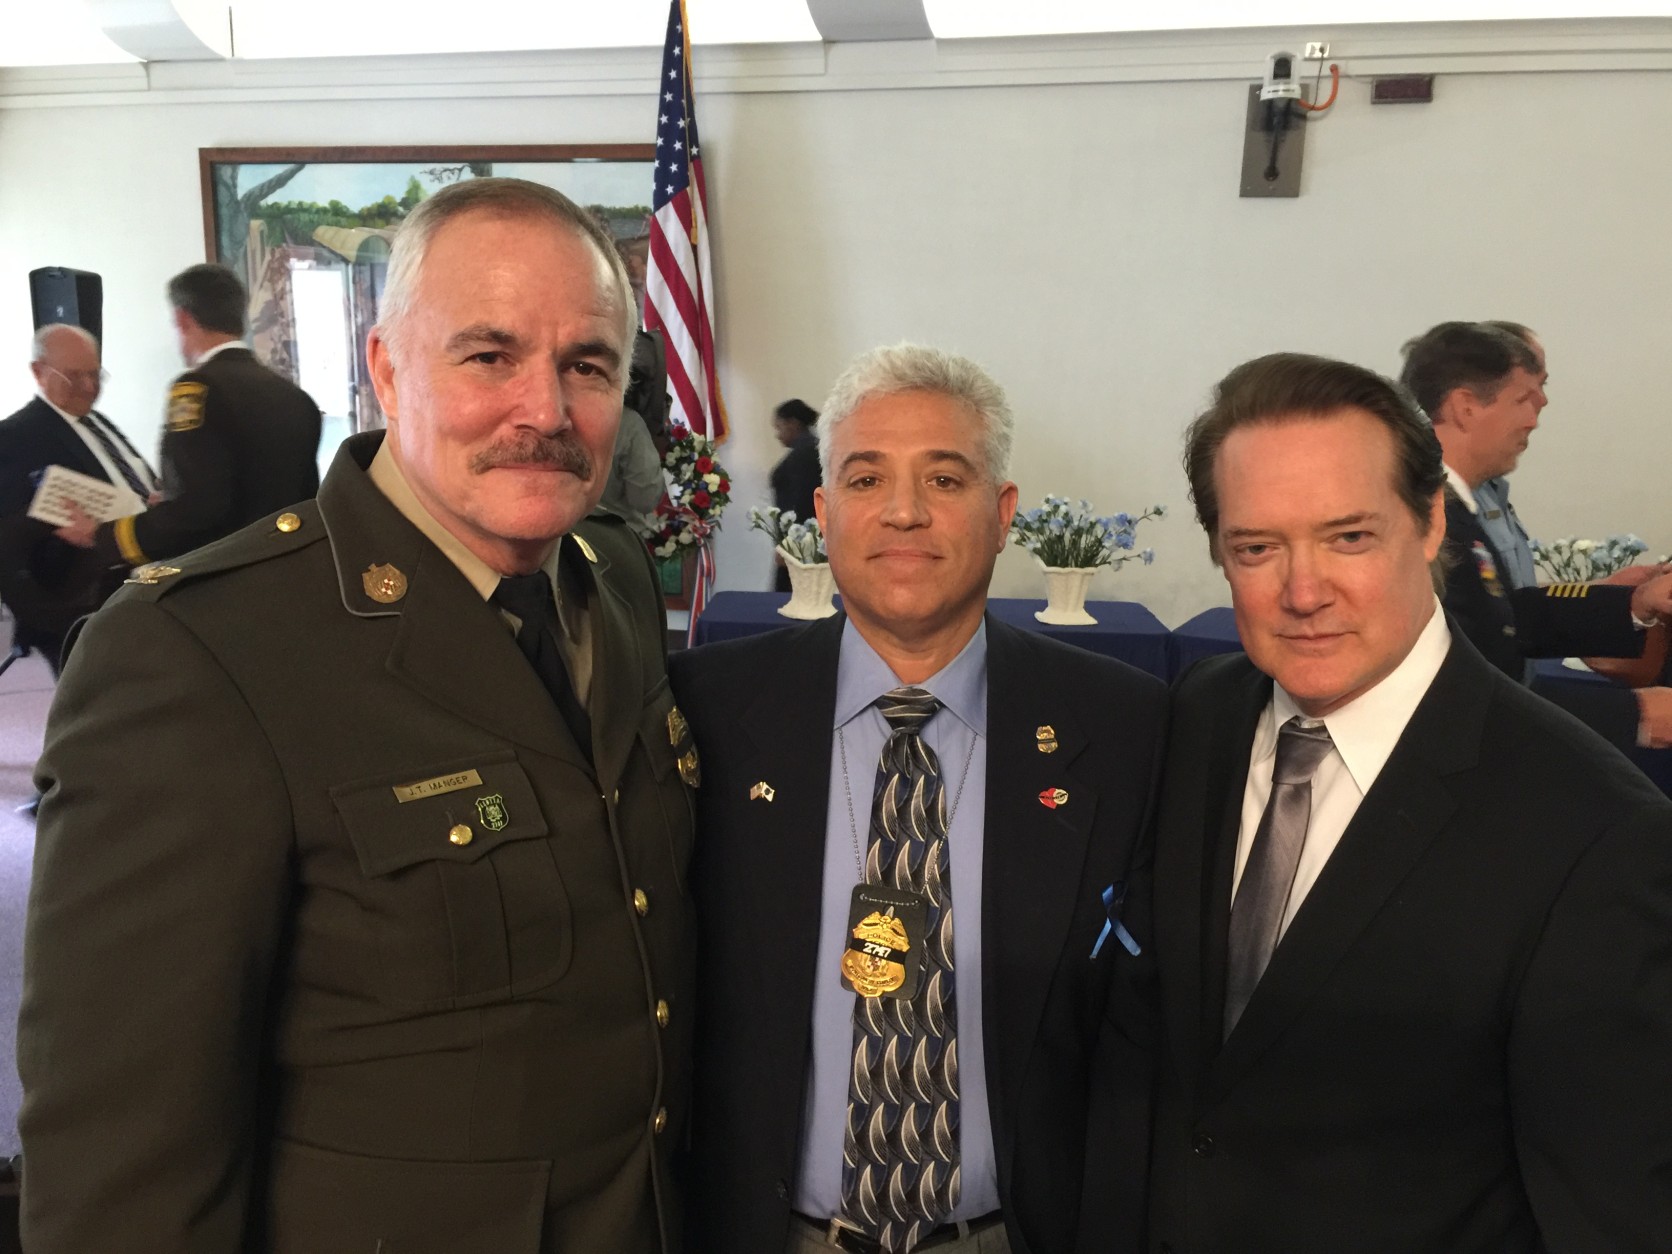 "It was an honor to be part such a poignant ceremony," said WTOP Anchor Shawn Anderson on right who served as emcee of the 37th Annual Washington Area Law Enforcement Officers Memorial Service.  "Whether they were police chiefs...rank and file officers...or family members of the fallen...it was apparent everyone was moved." Pictured with Montgomery County Police Chief Tom Manger with Rich Leotta who is wearing the badge of his son Officer Noah Leotta who was killed by a suspected drunk driver last year. (WTOP/Kristi King)